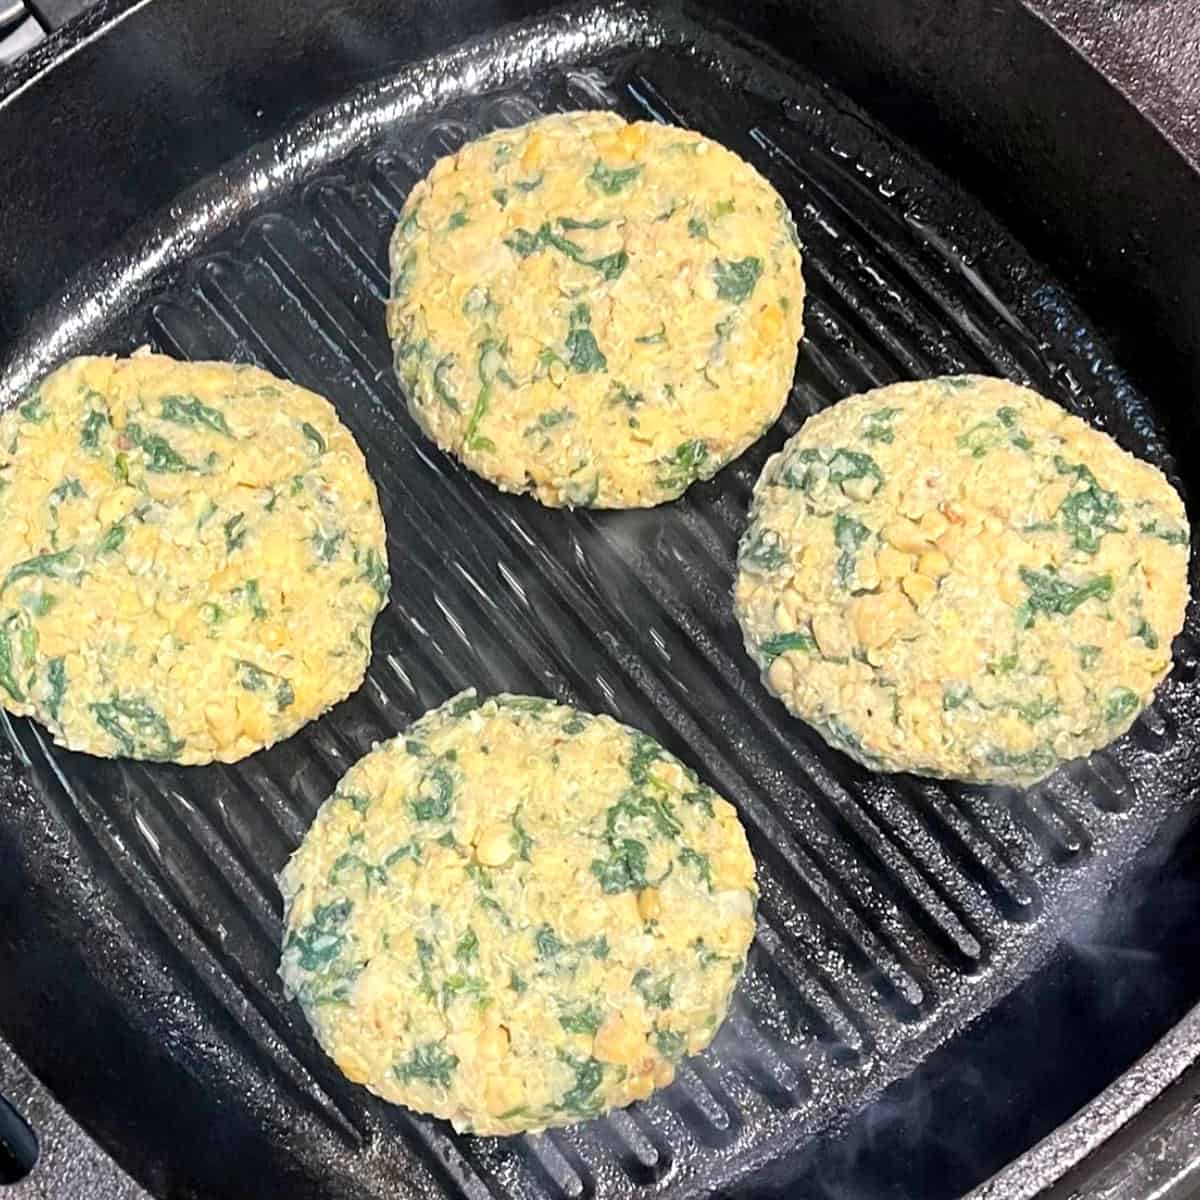 Chickpea quinoa burger patties on a grill pan.